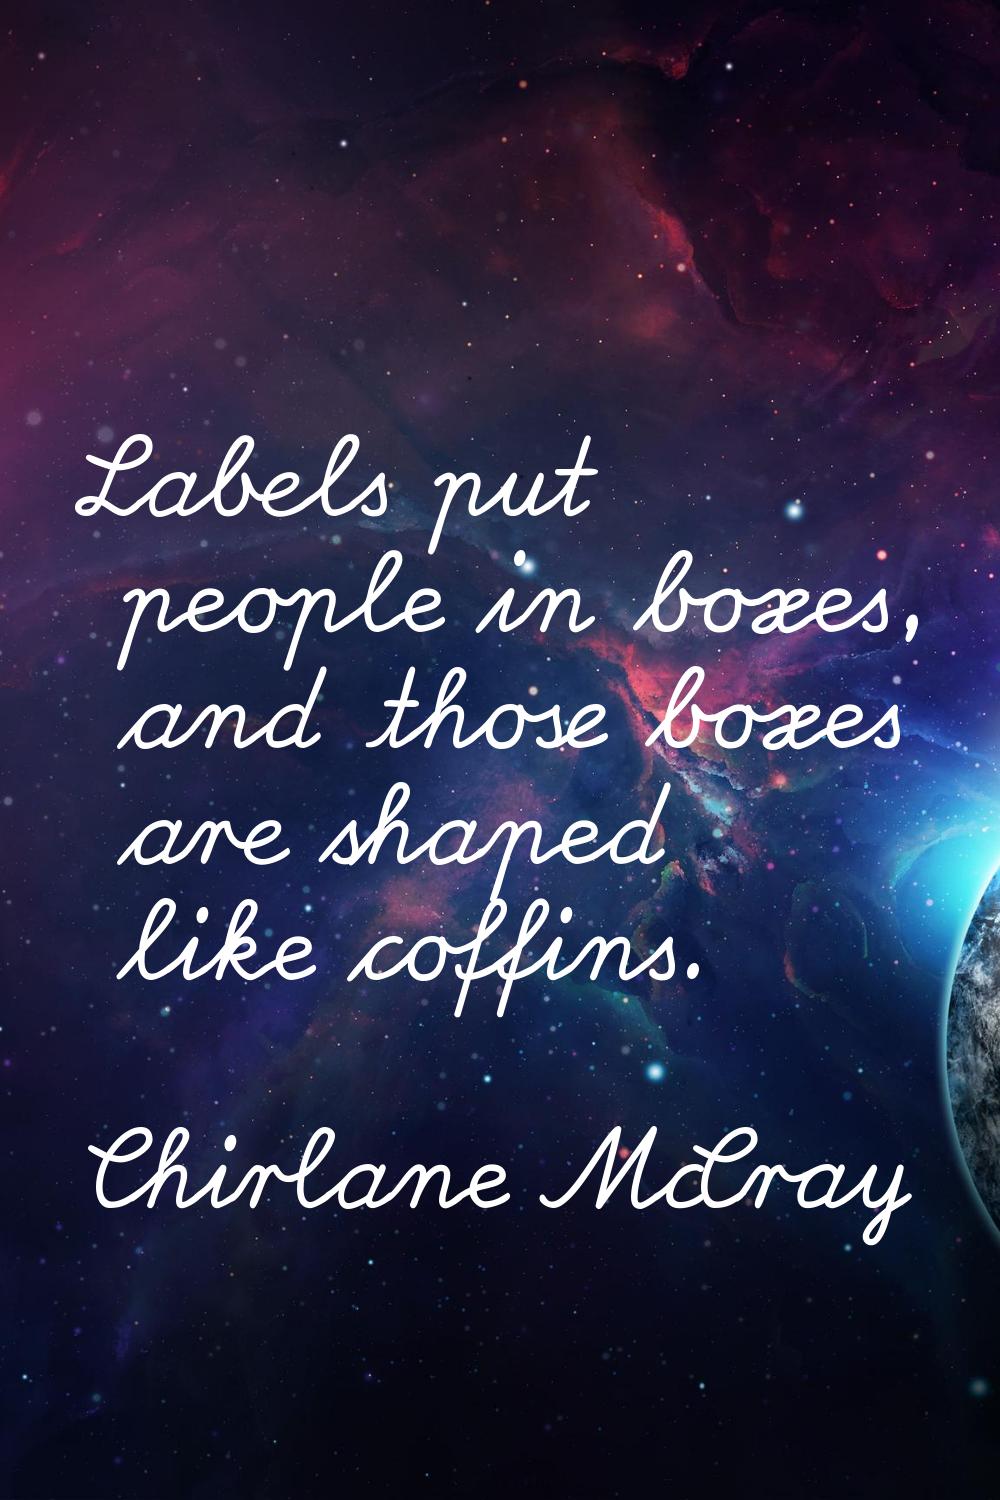 Labels put people in boxes, and those boxes are shaped like coffins.